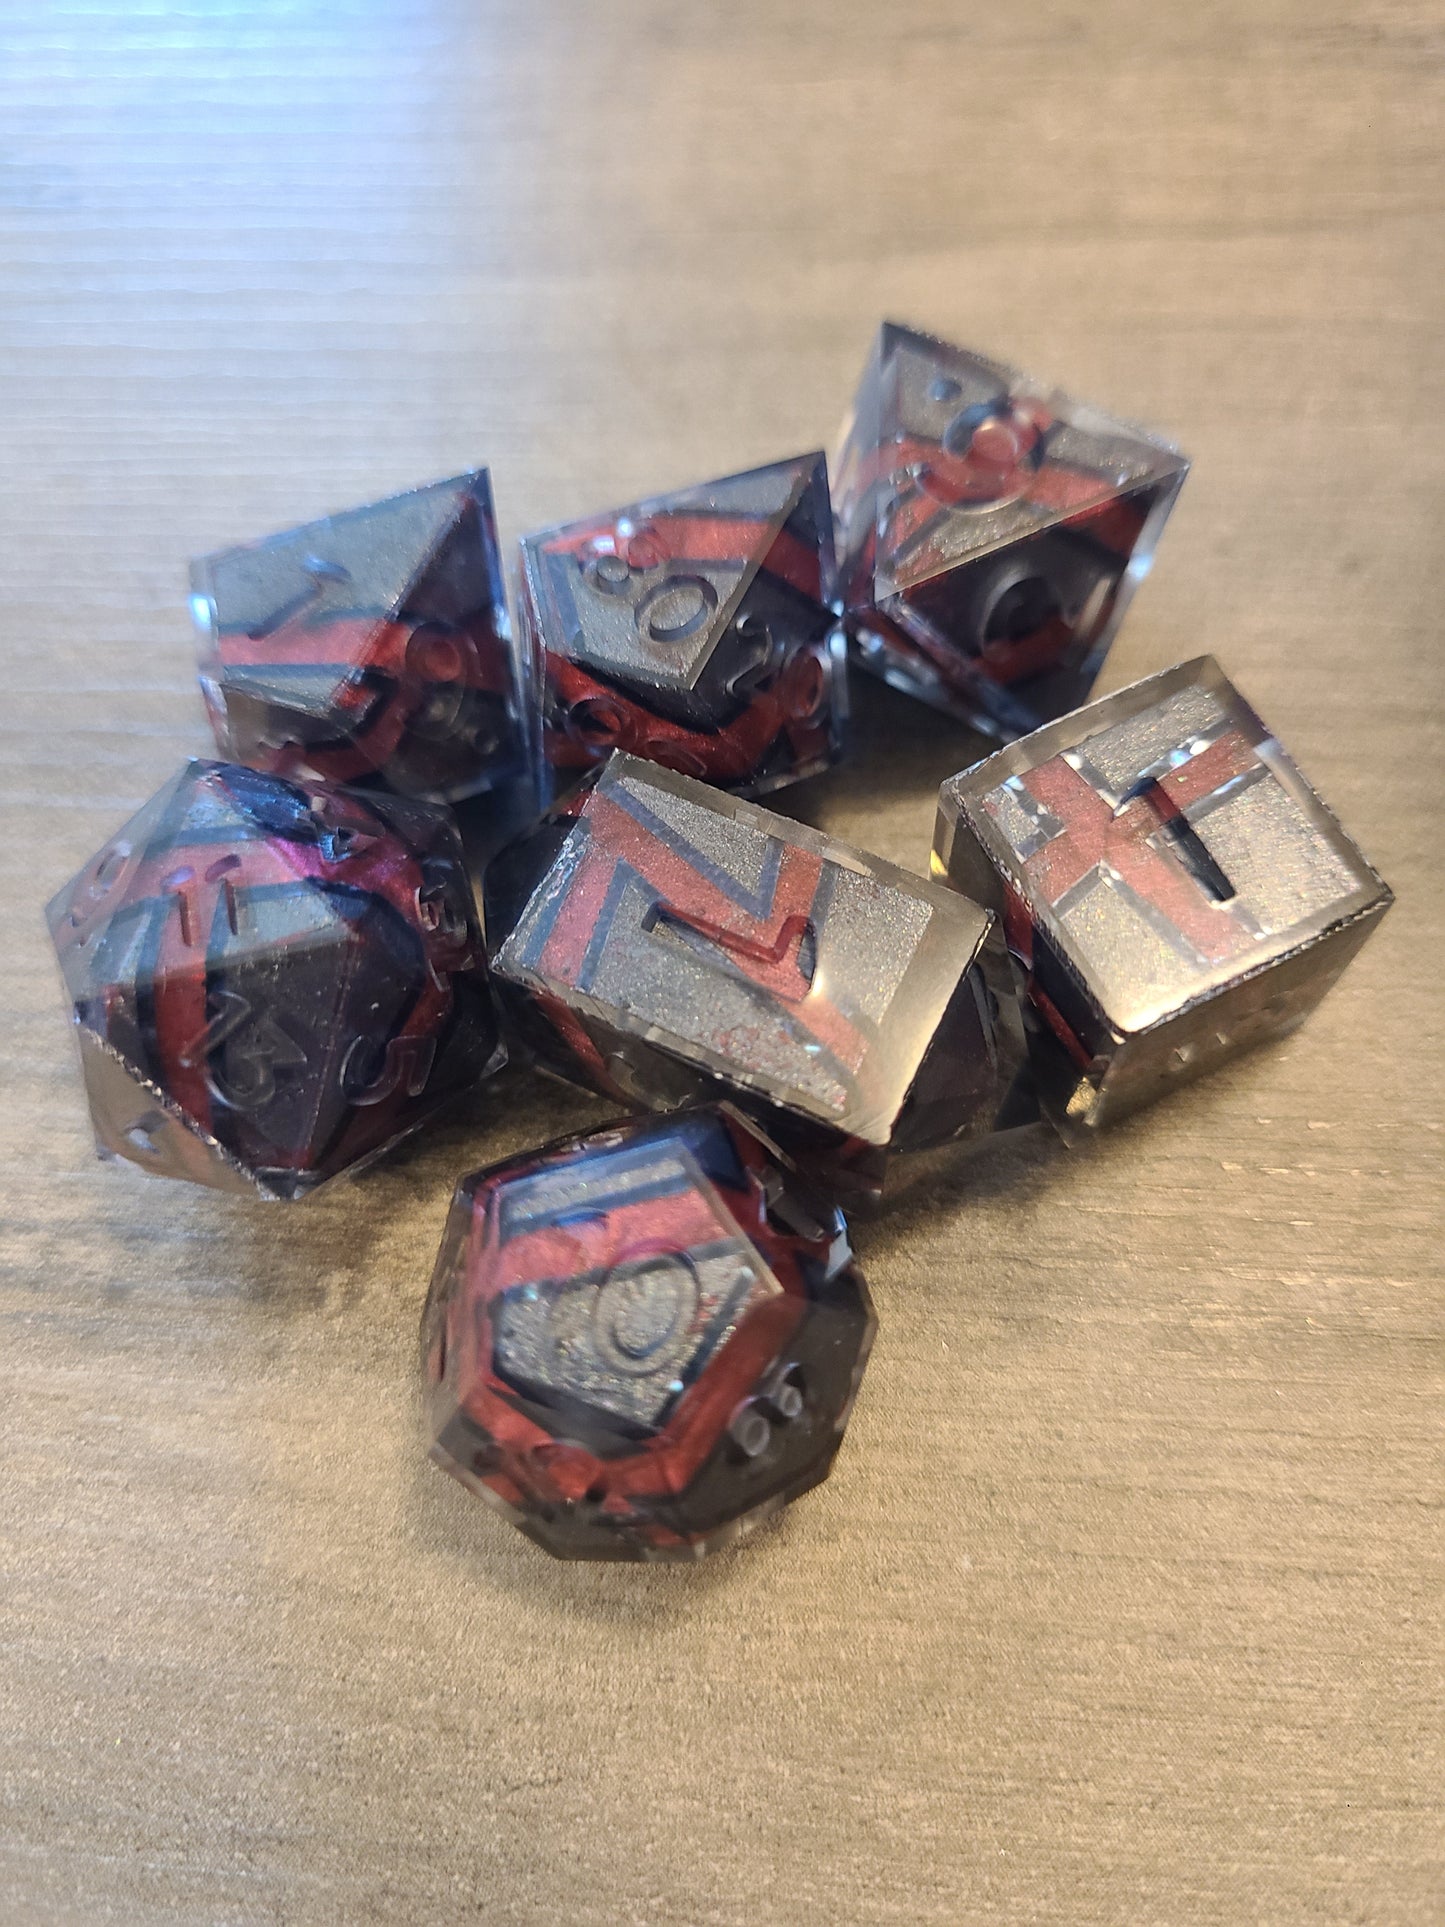 Paladin Inspired - Shattered Glass Dice